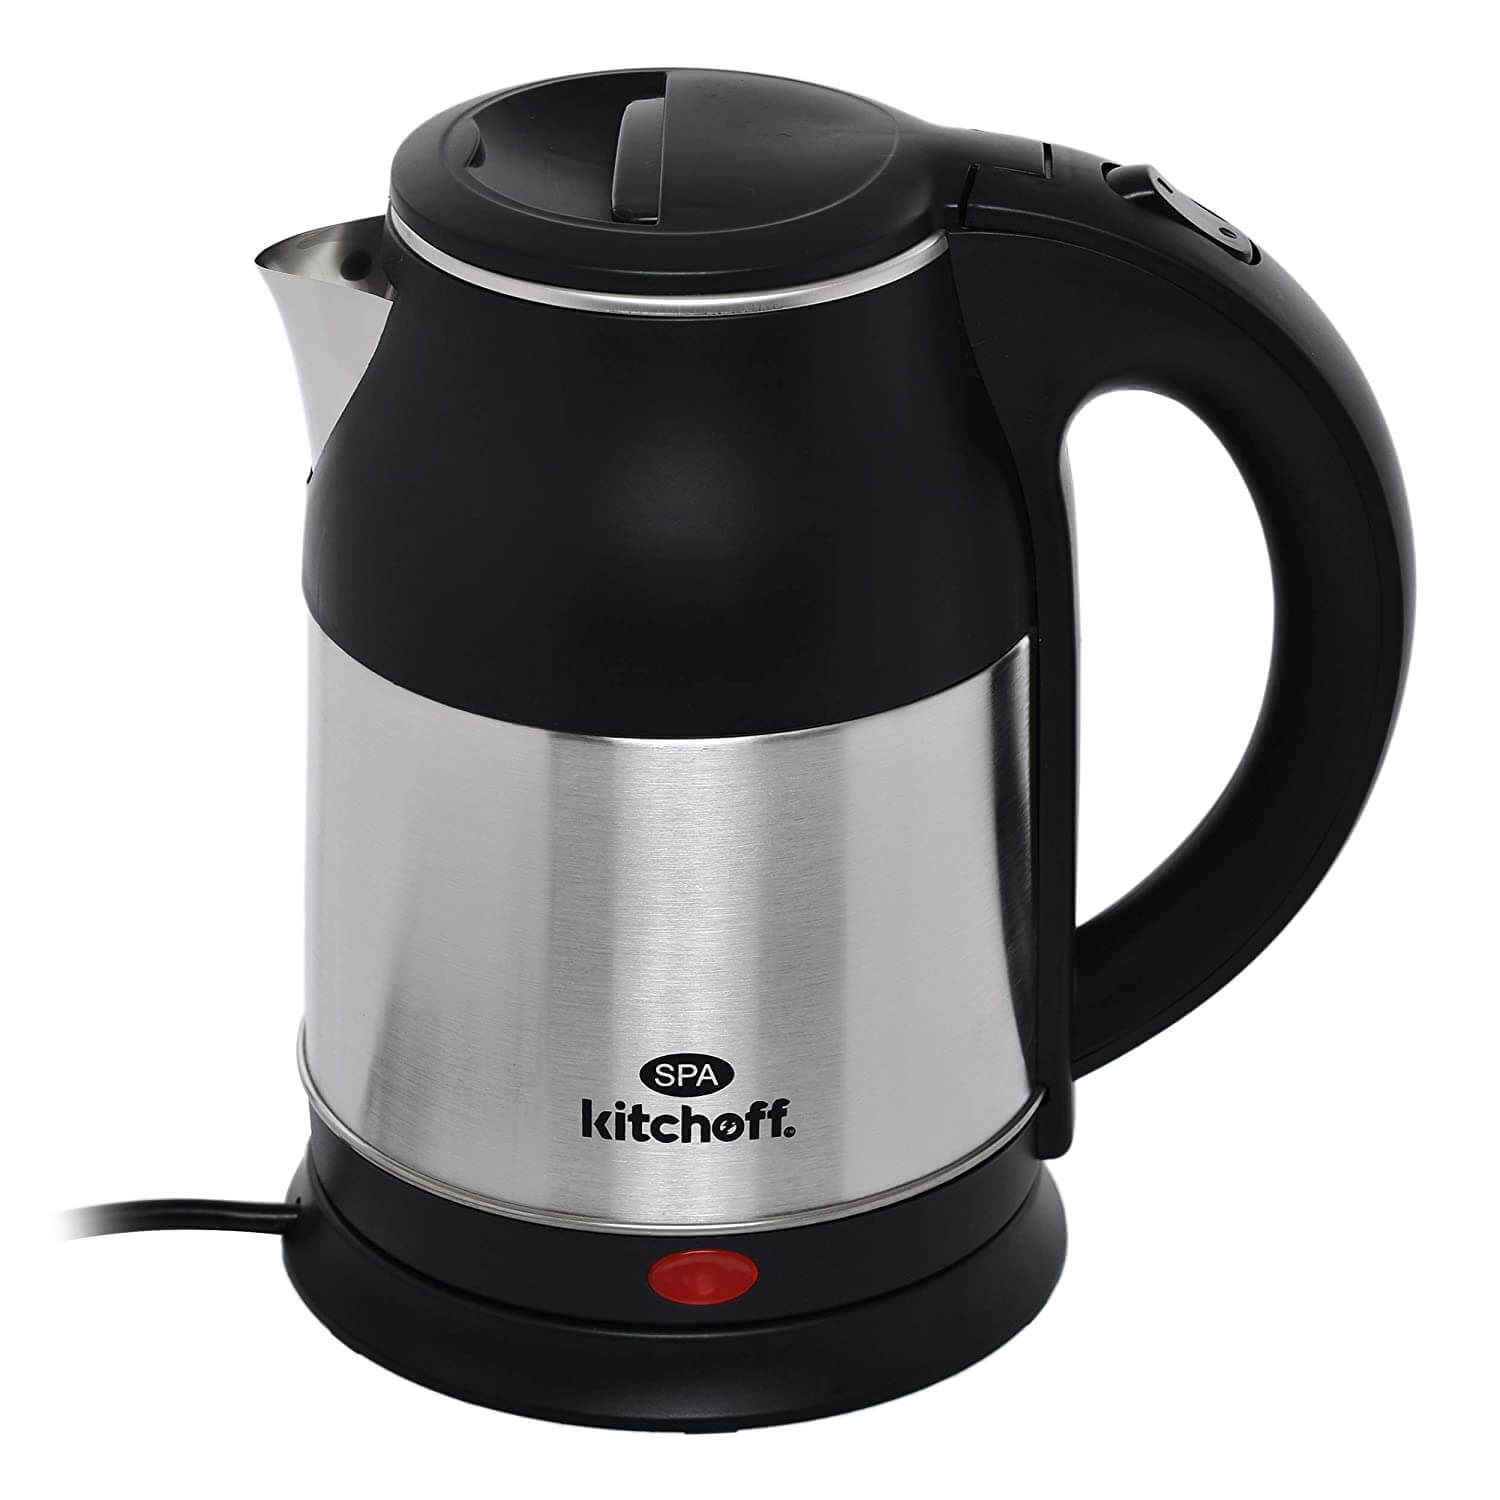 Kitchoff Automatic Stainless Steel Kettle 